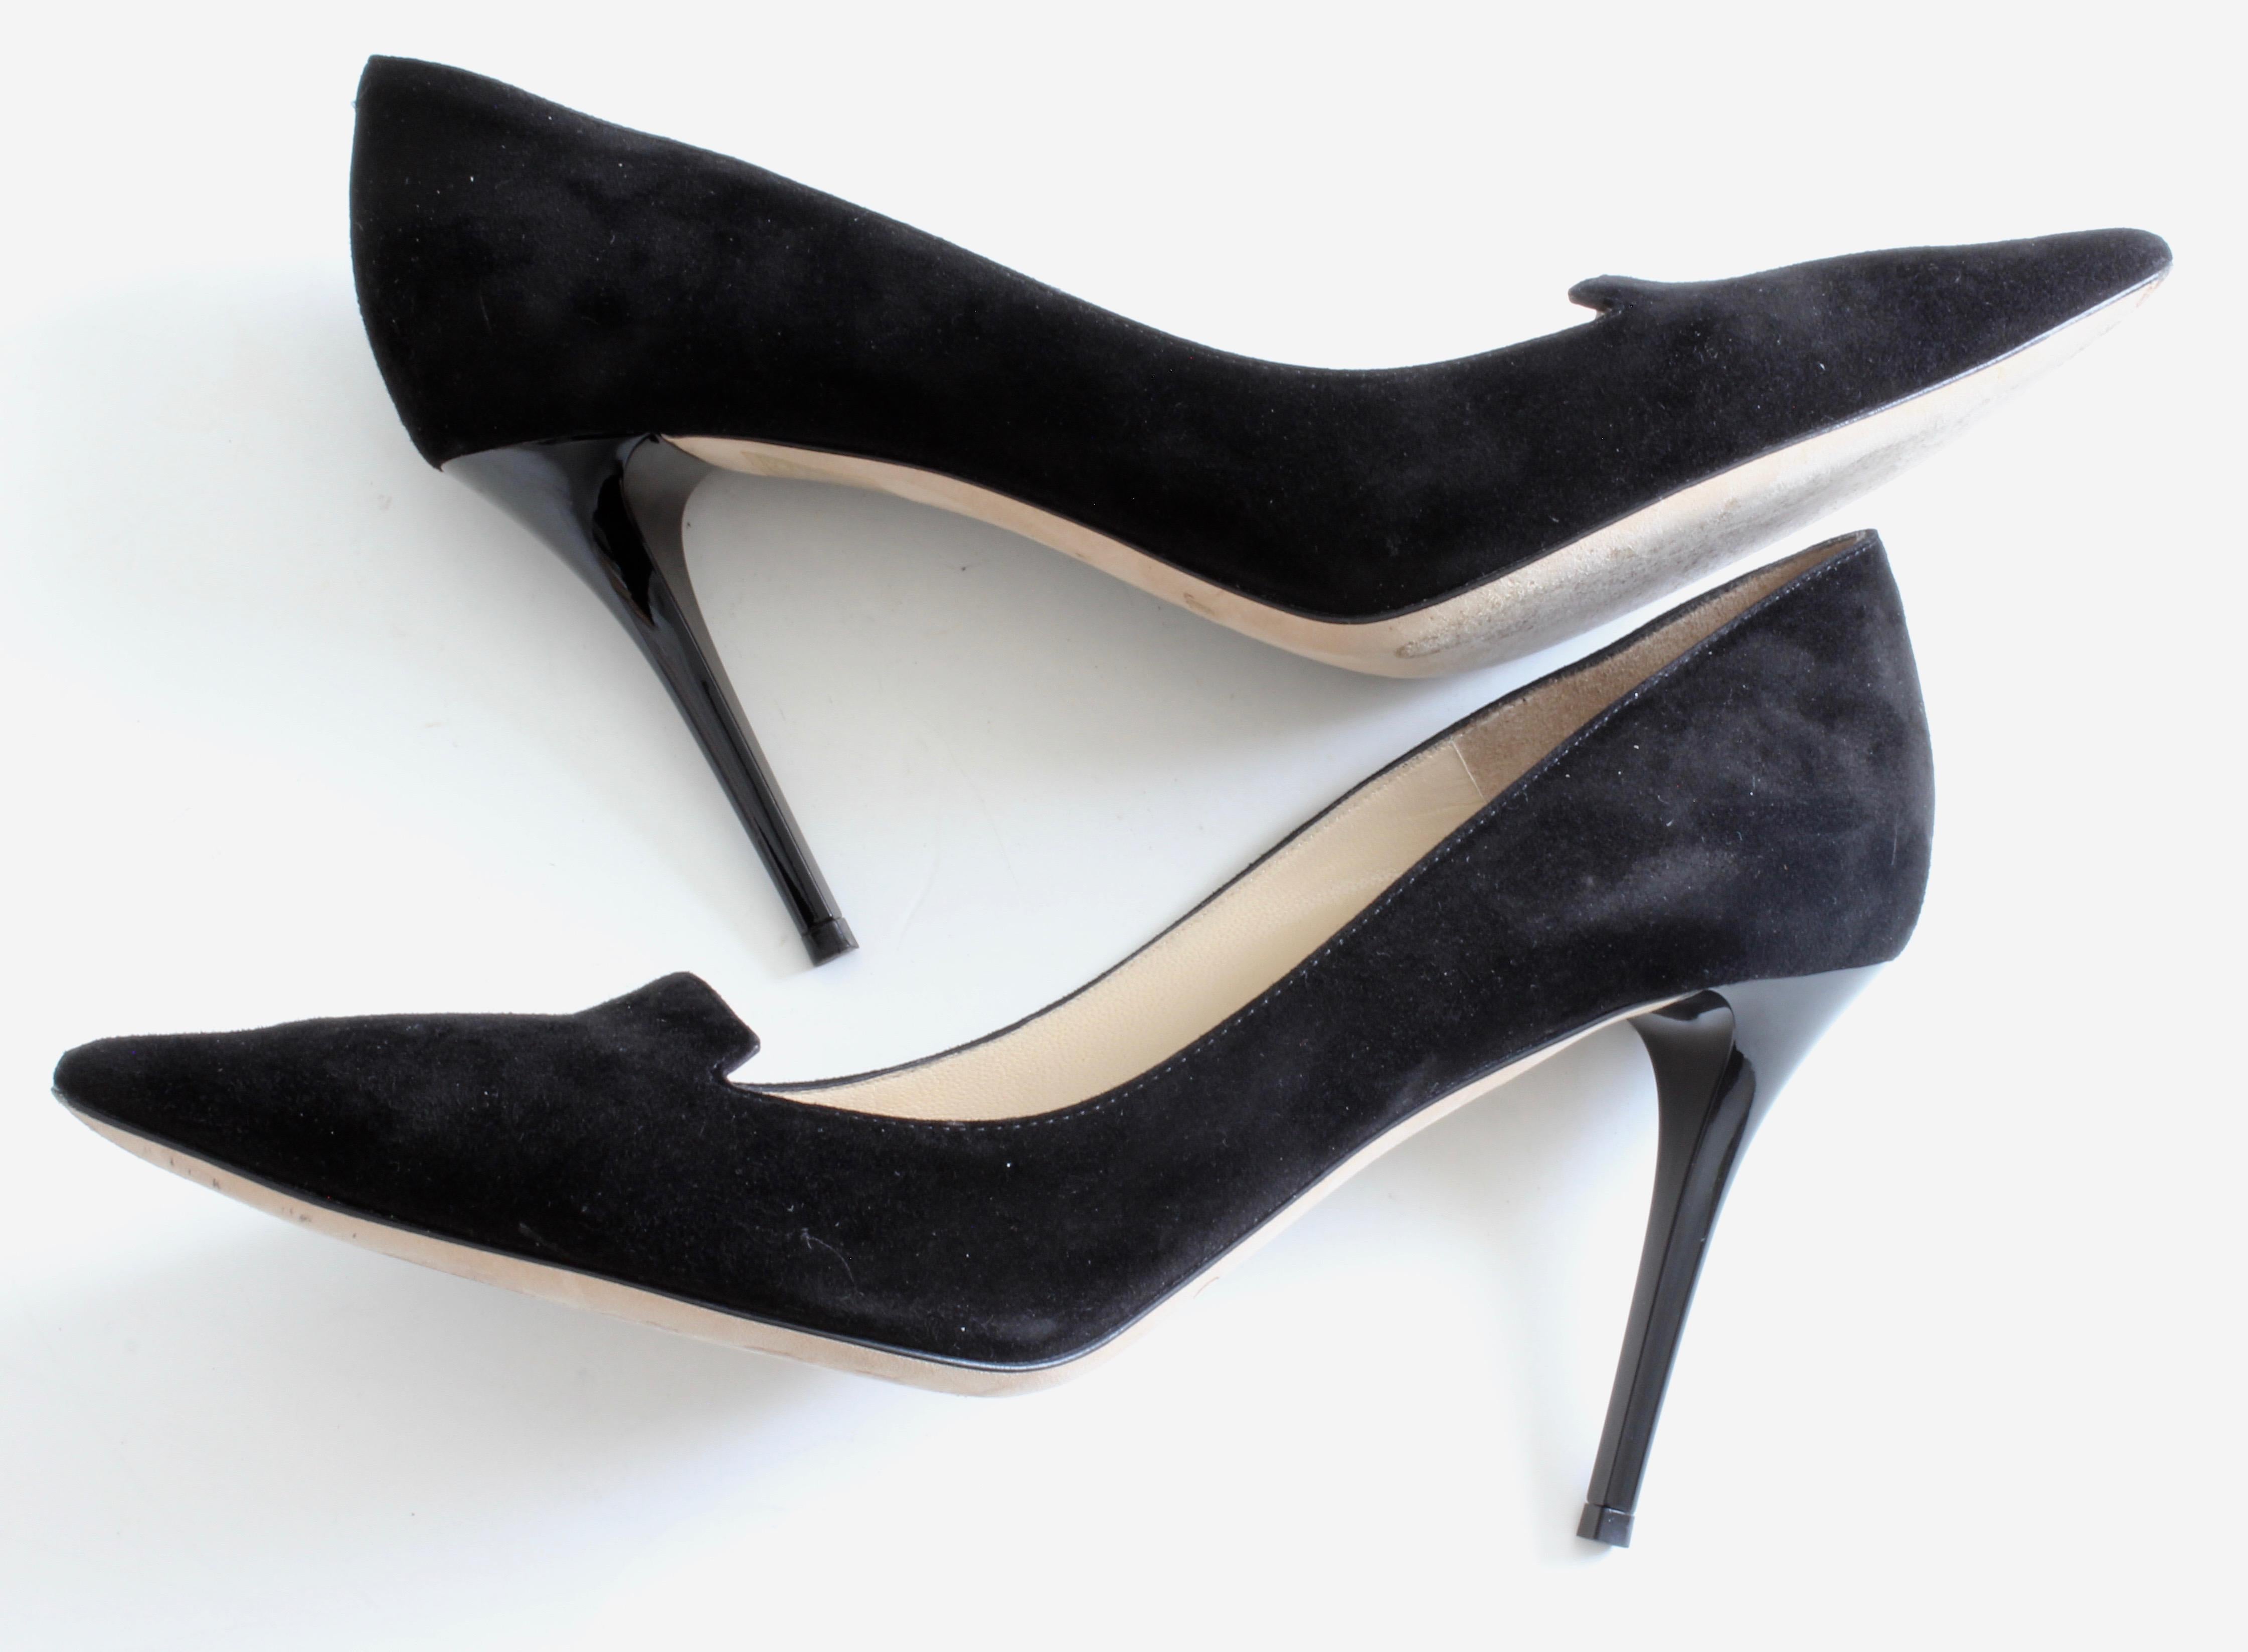 Jimmy Choo Heels Black Stiletto Pumps 247 Alia Suede Leather with Box For Sale 3